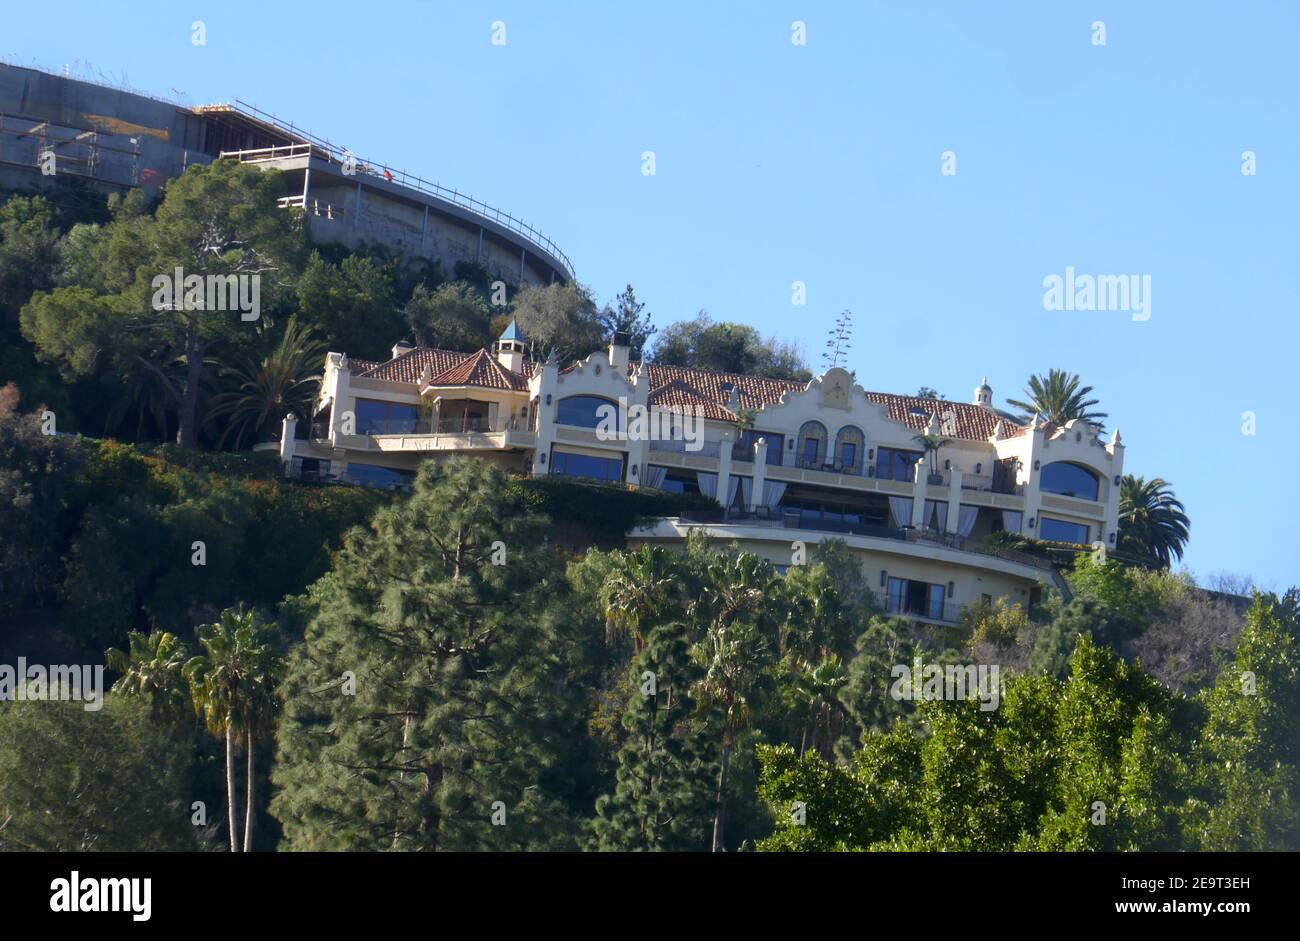 Beverly Hills, California, USA 5th February 2021 A general view of atmosphere of 10066 Cielo Drive where Shaton Tate Lived and Mansion Murders took place (formerly 10050 Cielo Drive) on February 5, 2021 in Beverly Hills, California, USA. Photo by Barry King/Alamy Stock Photo Stock Photo